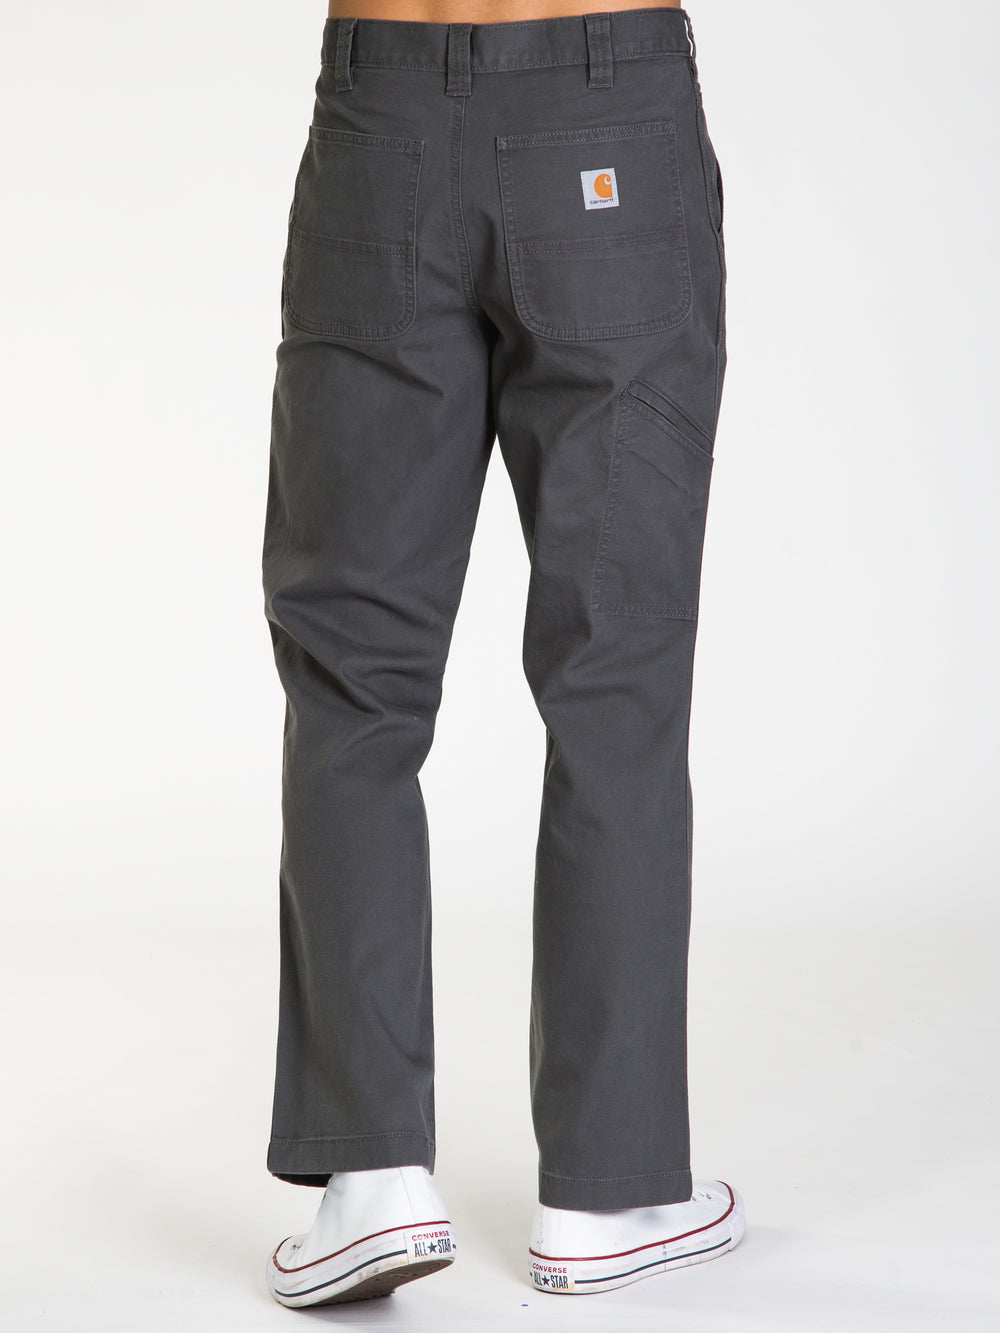 Carhartt Women's Relaxed Fit Sweatpants - Traditions Clothing